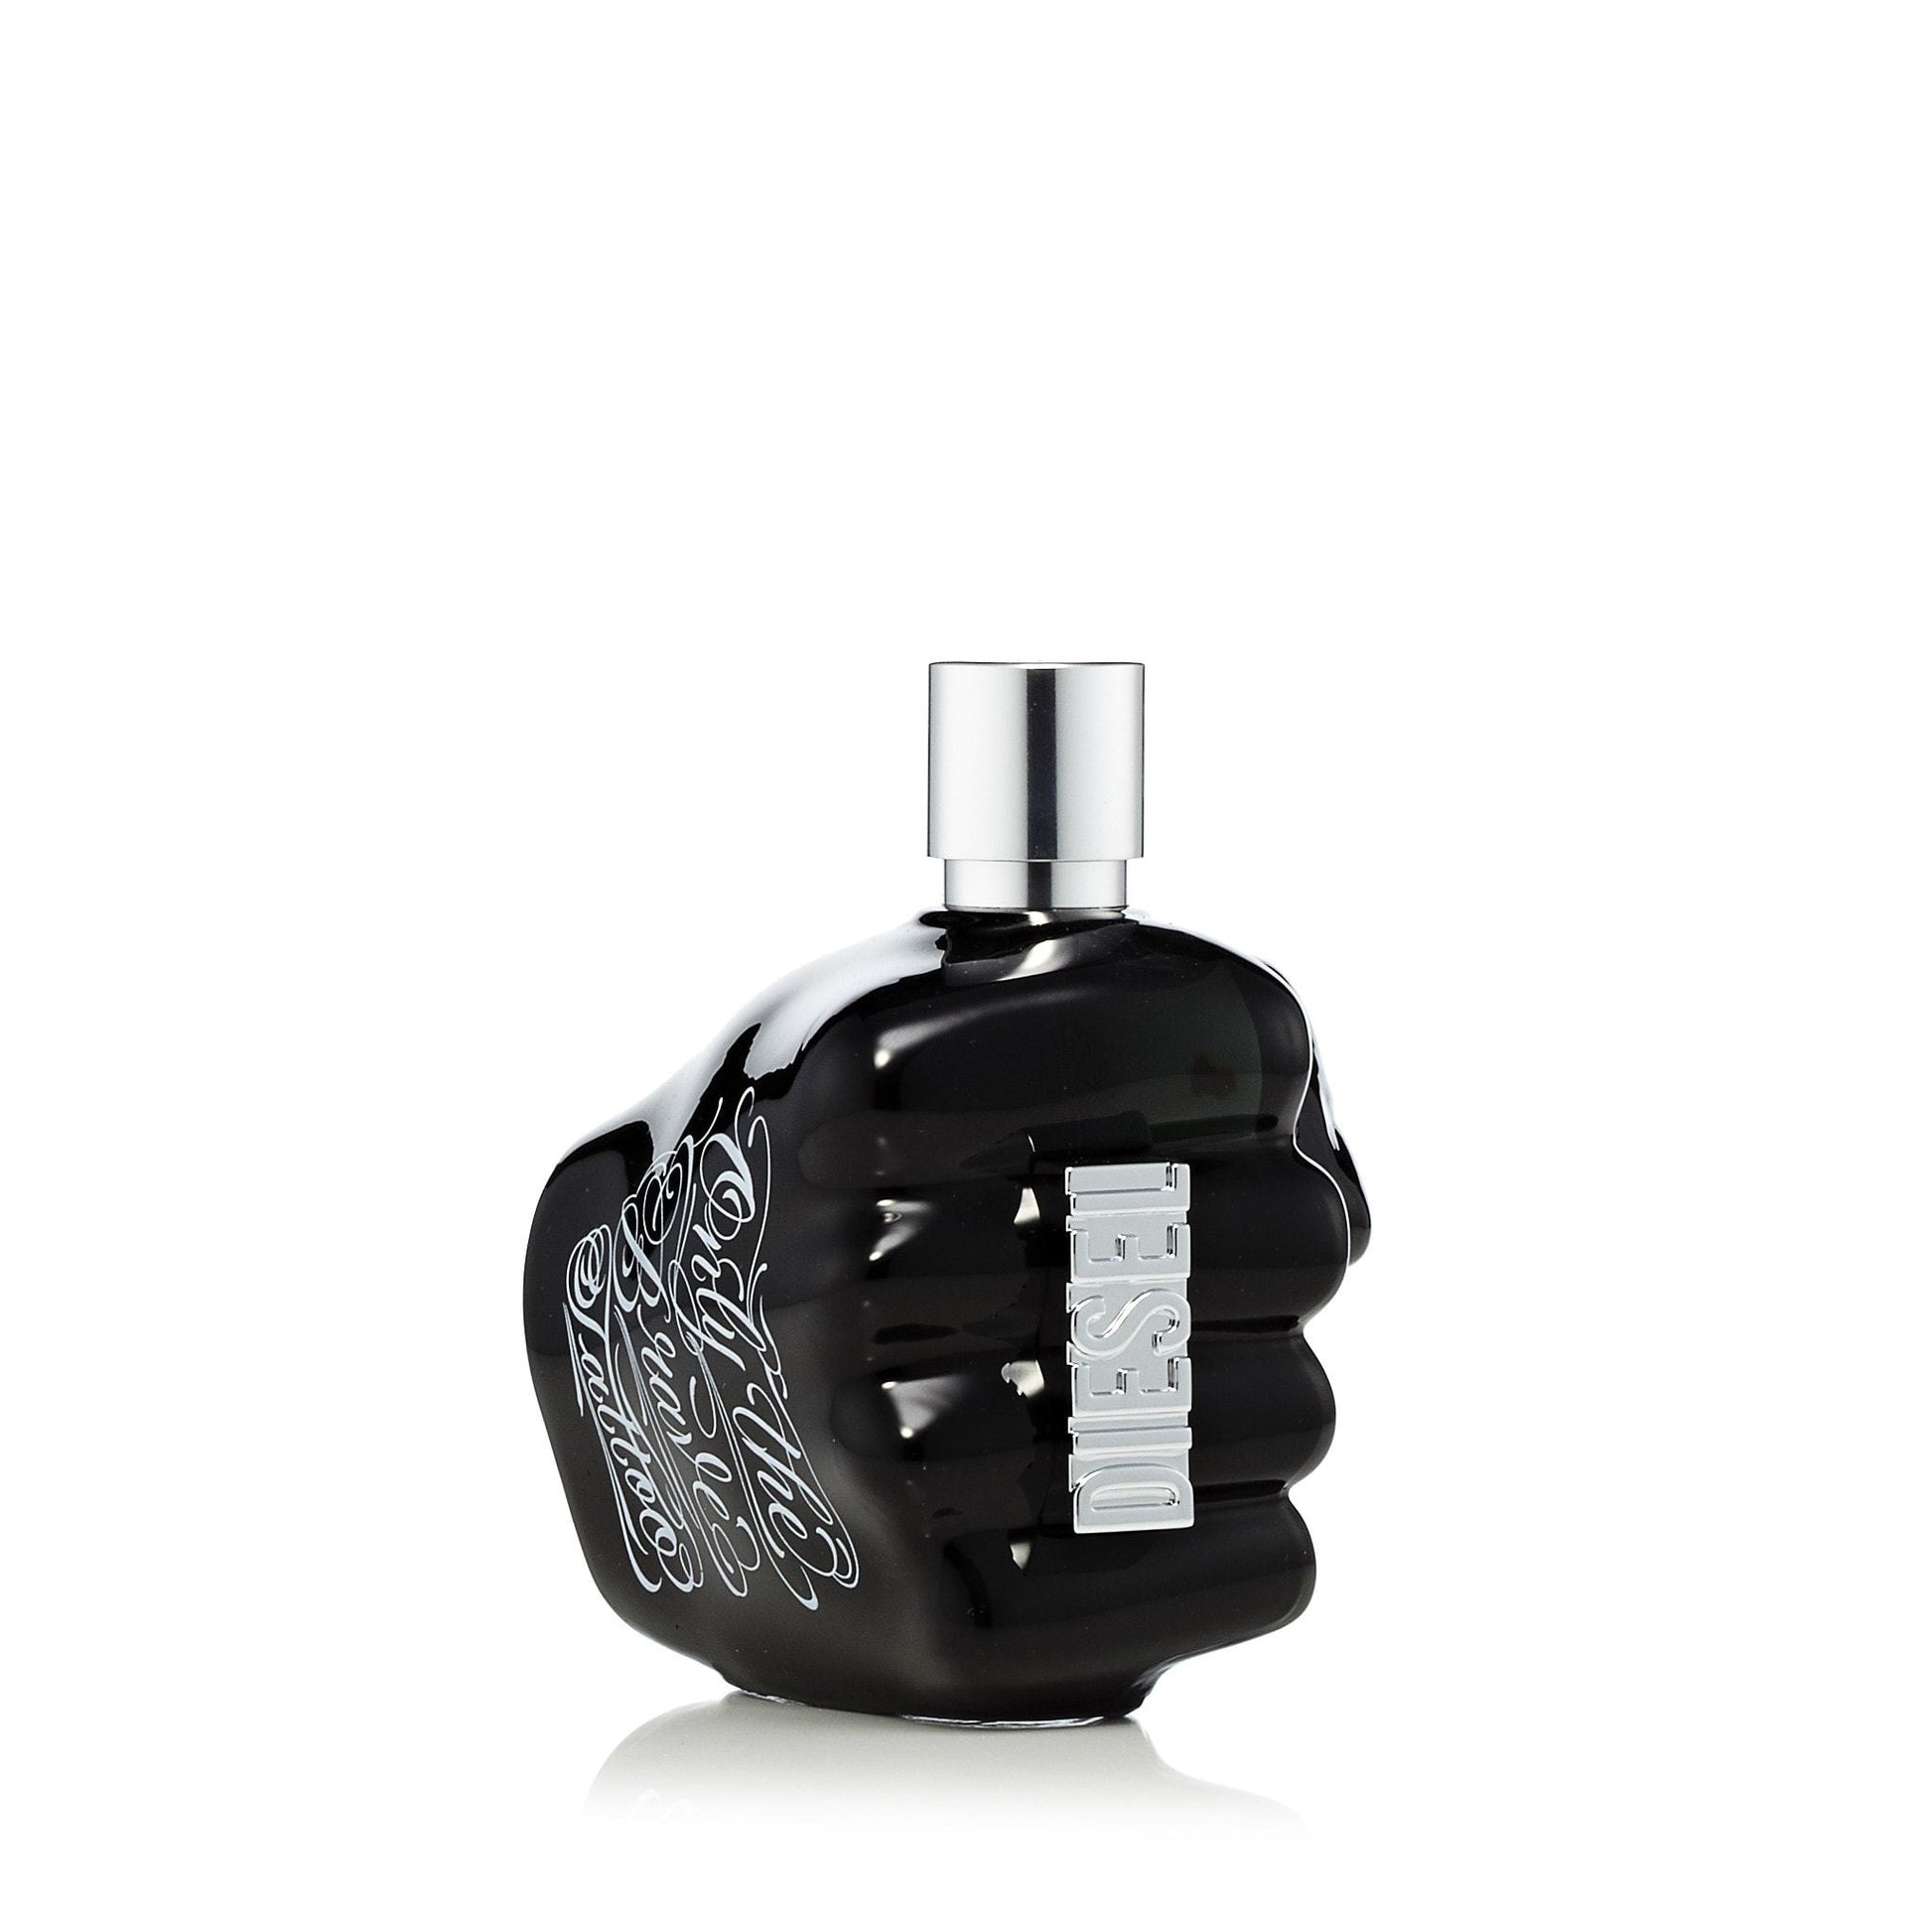 Only The Brave Tattoo Eau de Toilette Spray for Men by Diesel, Product image 1